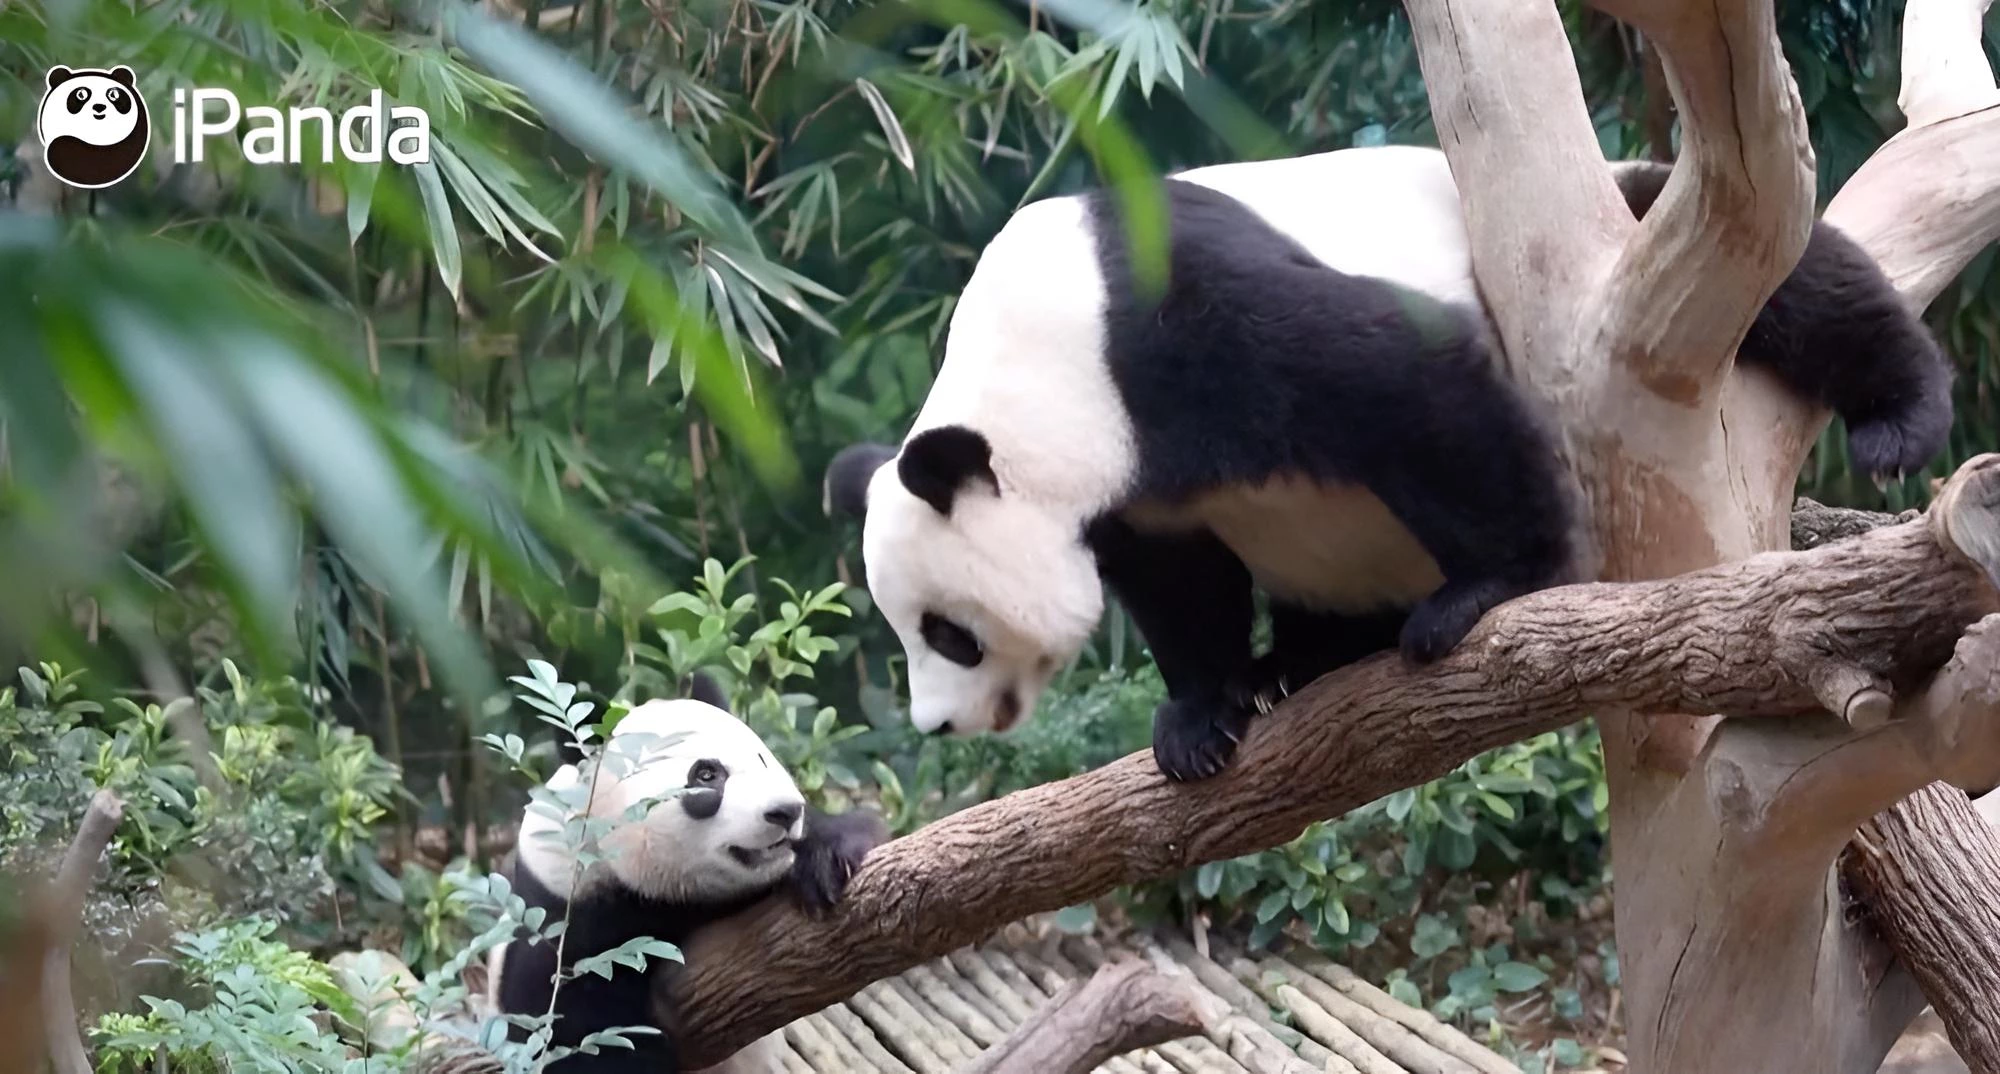 The giant panda from Singapore has returned to China